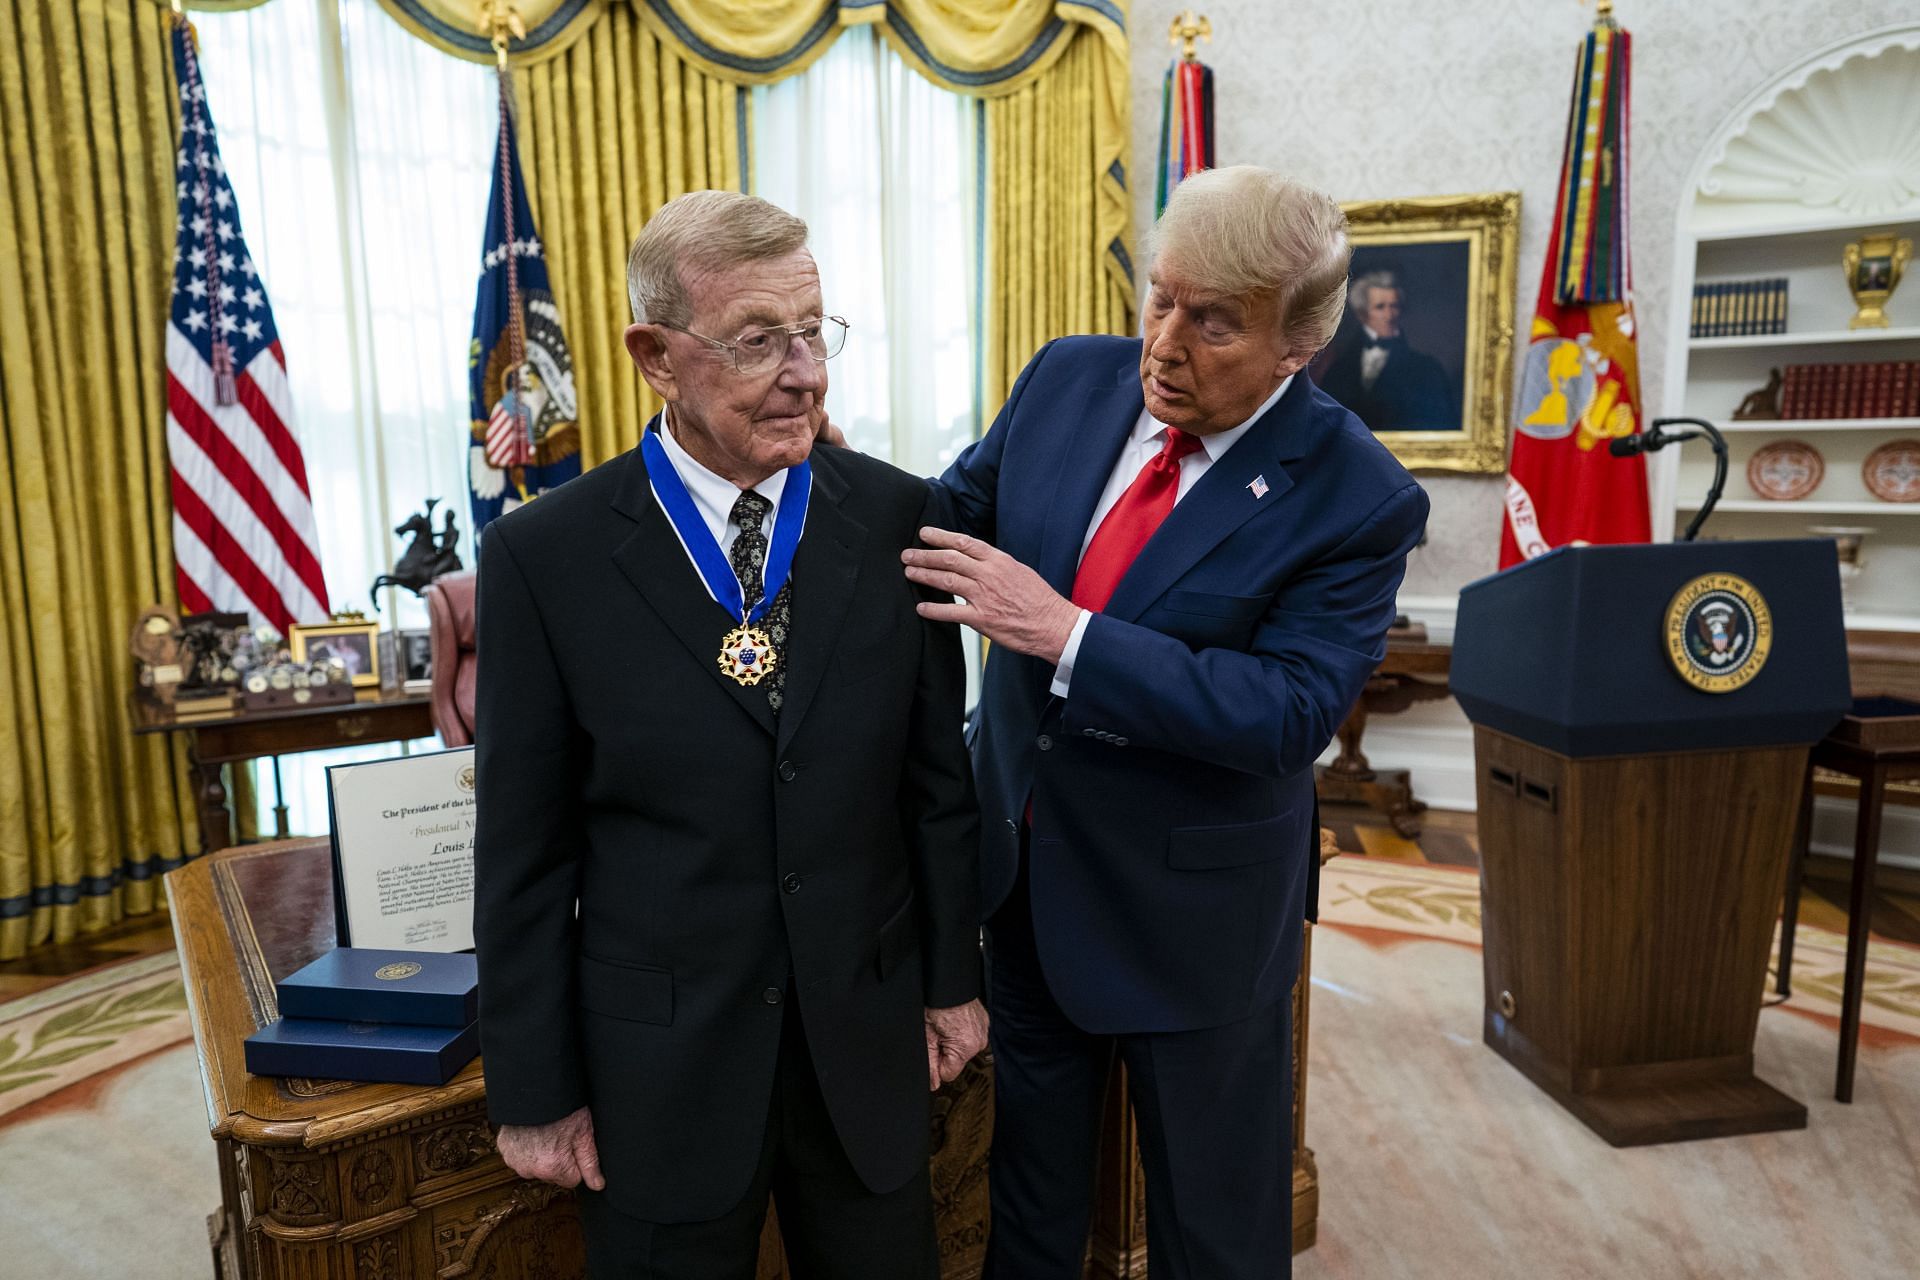 Holtz is awarded the Presdential Medal of Freedom by President Donald Trump in December 2020 (Photo: Getty)